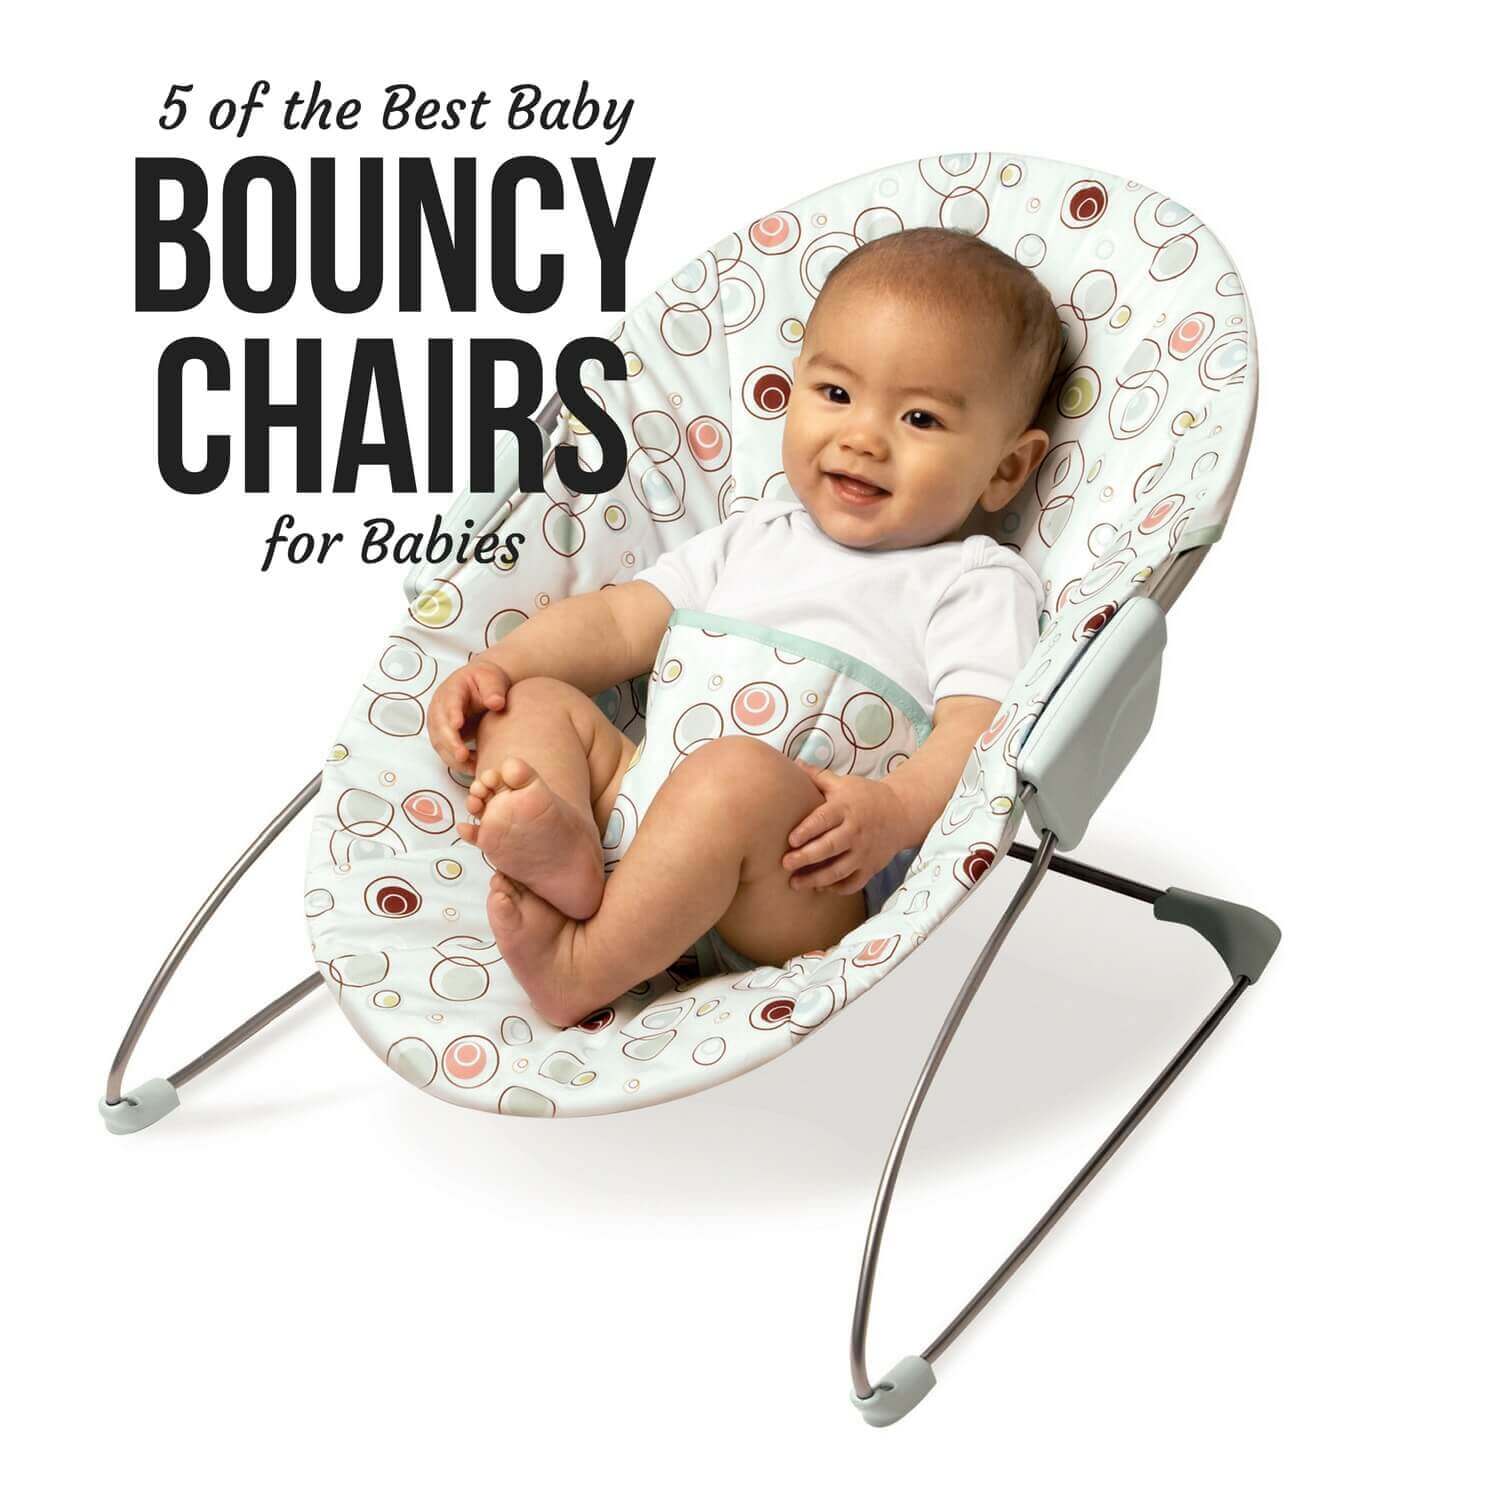 5 OF THE BEST BOUNCY CHAIRS FOR BABIES